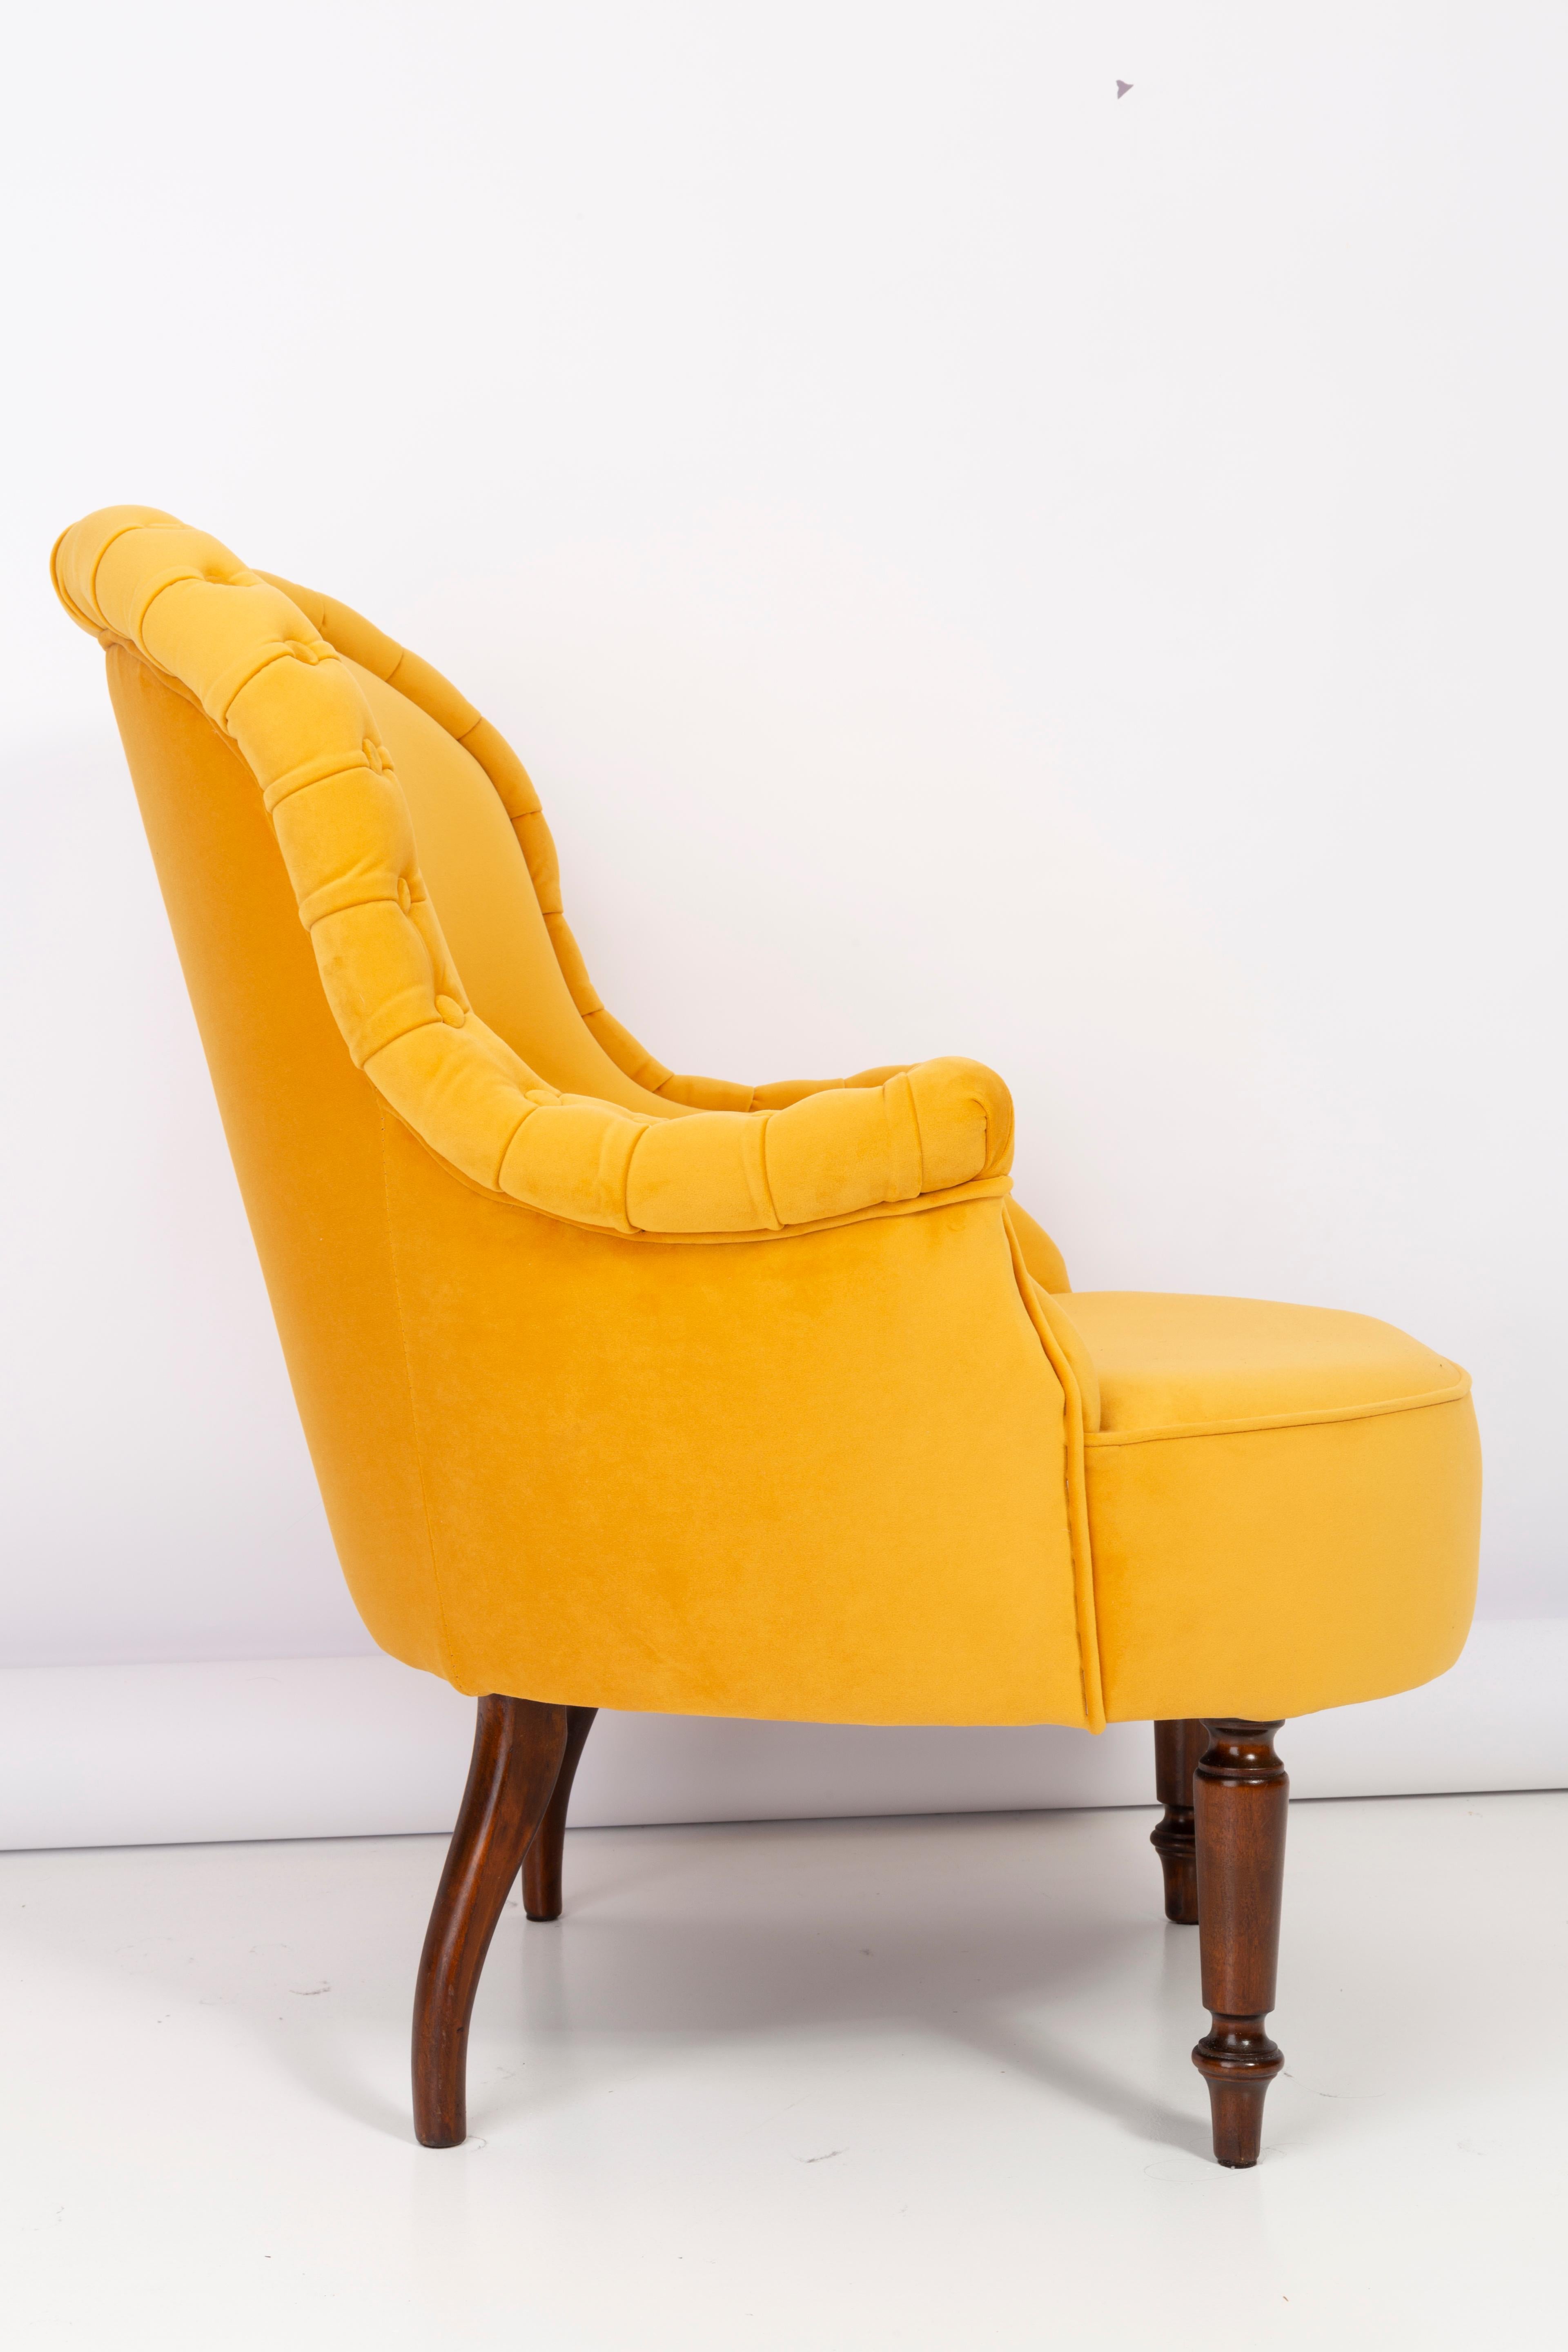 Pair of Unique Yellow Mustard Armchairs, 1930s, Germany In Excellent Condition For Sale In 05-080 Hornowek, PL